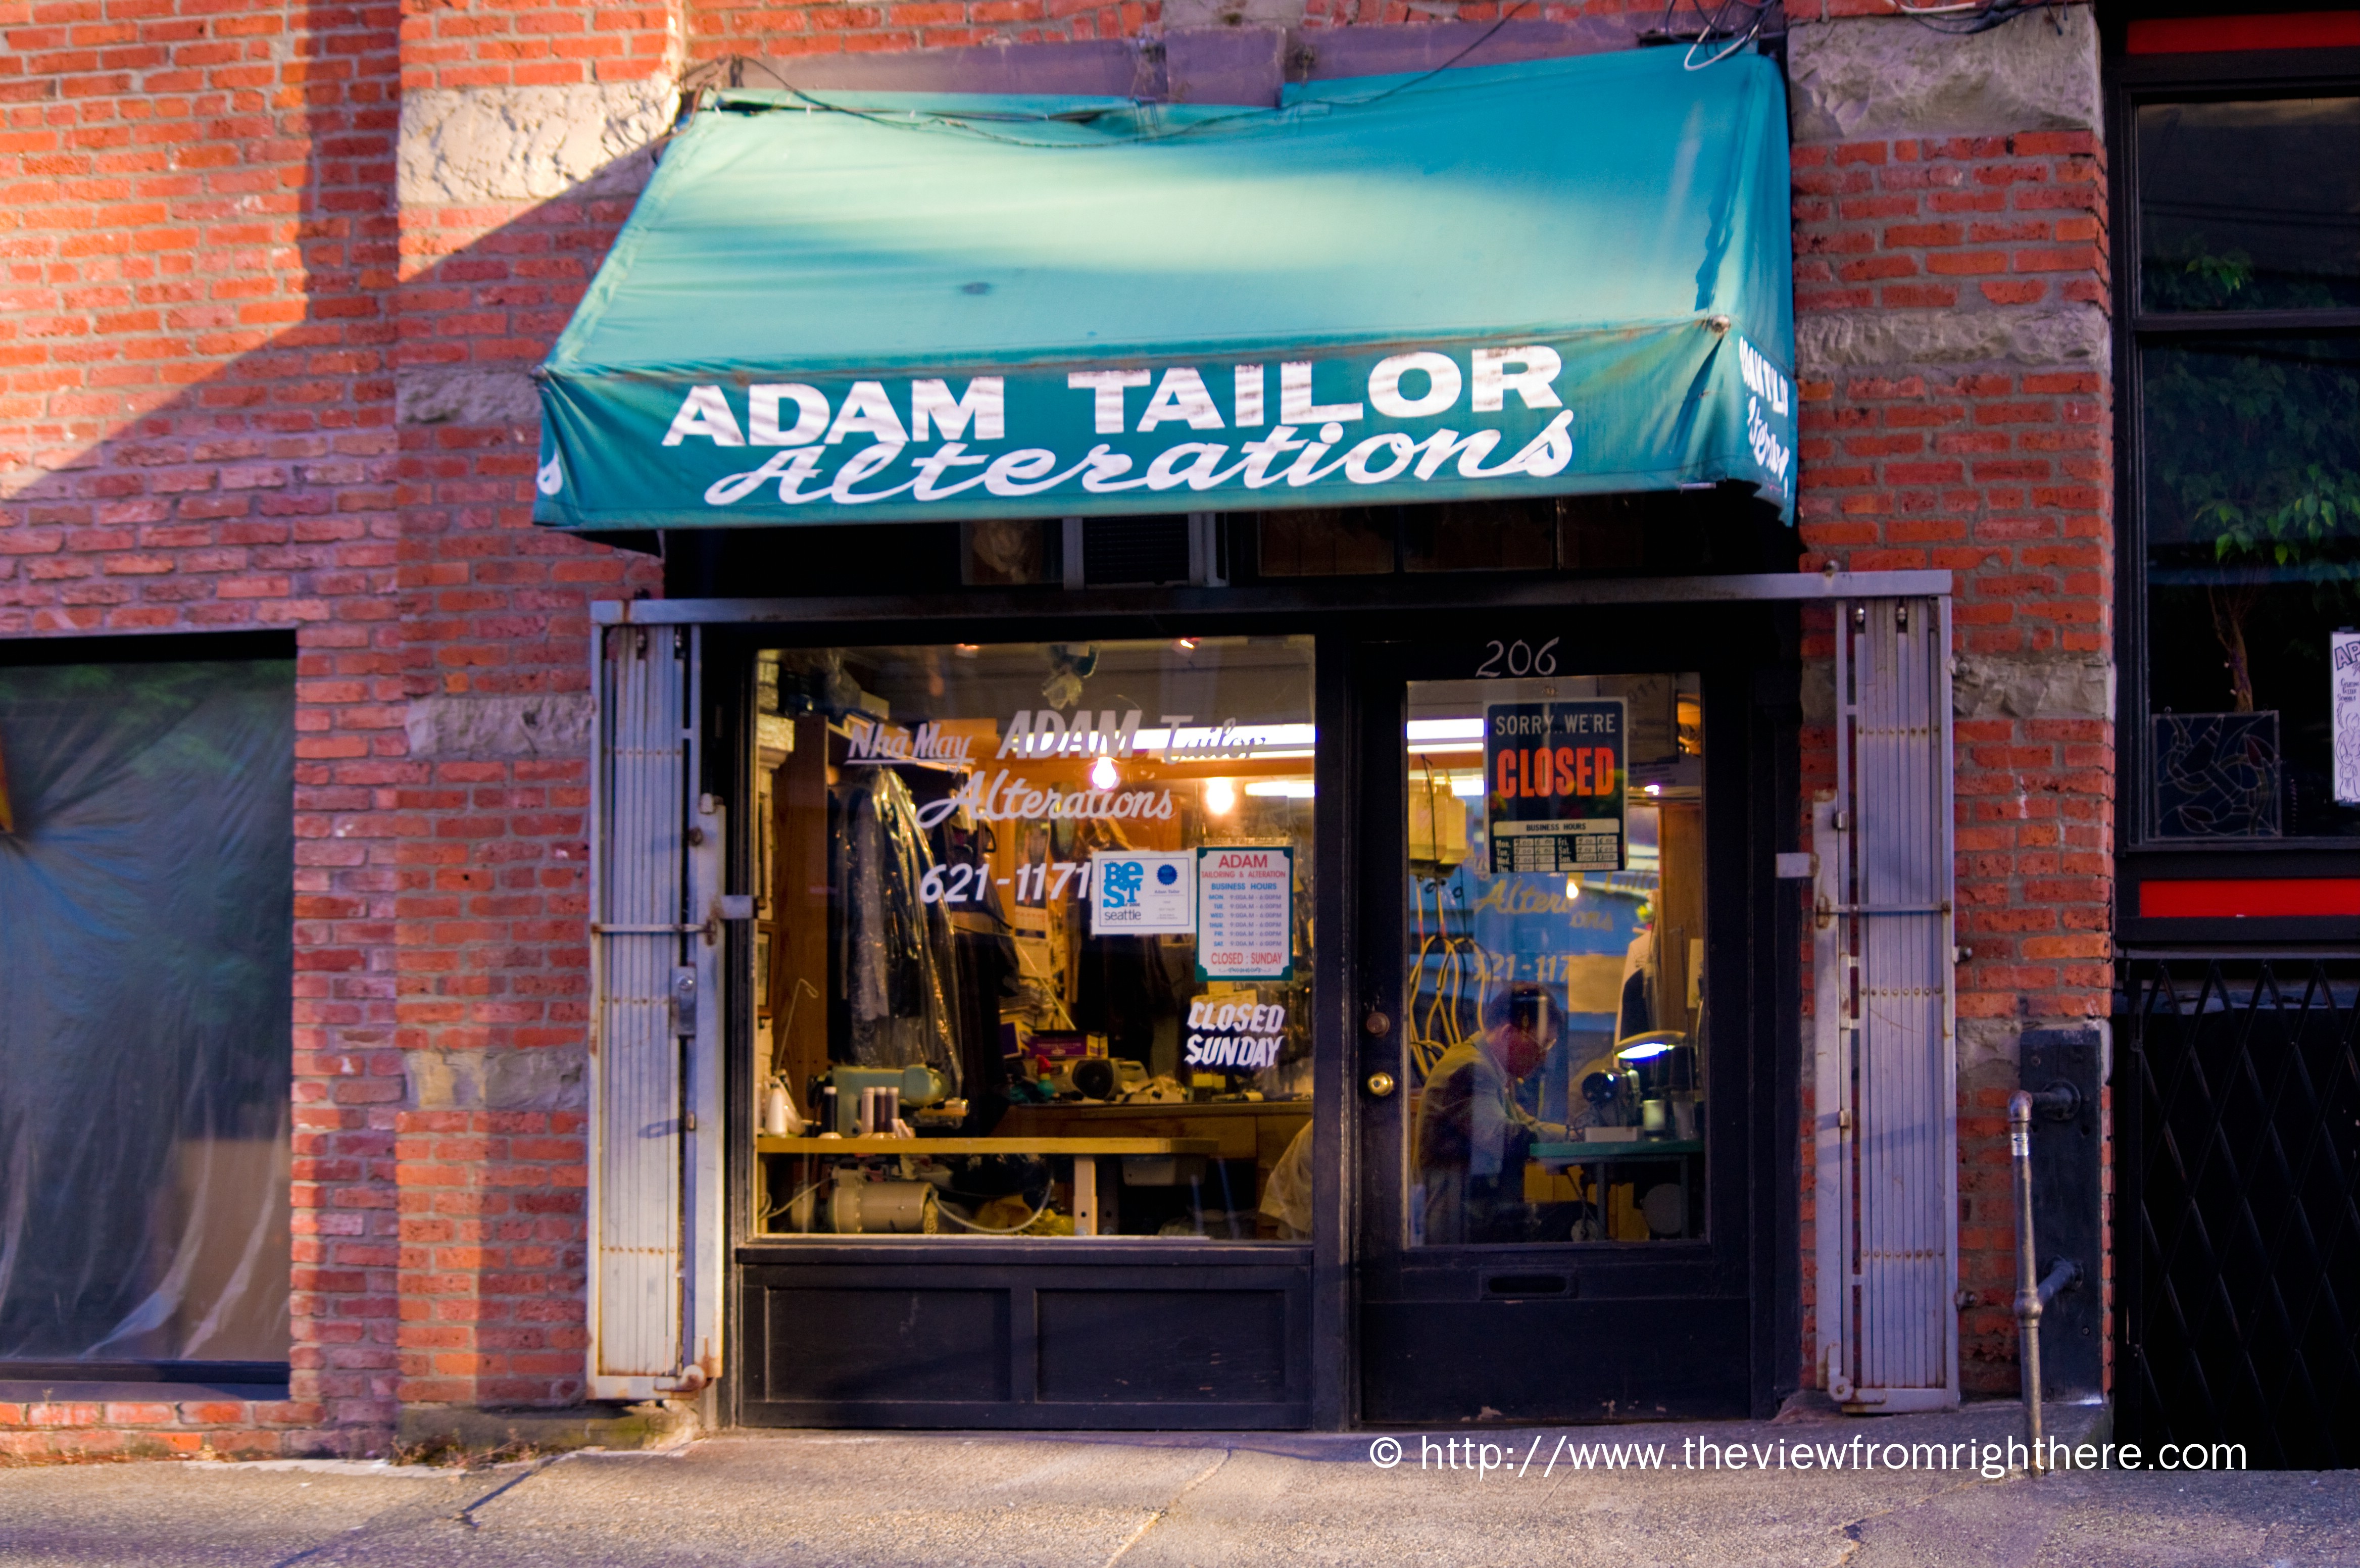 Nha’ May Adam Tailor and Alterations